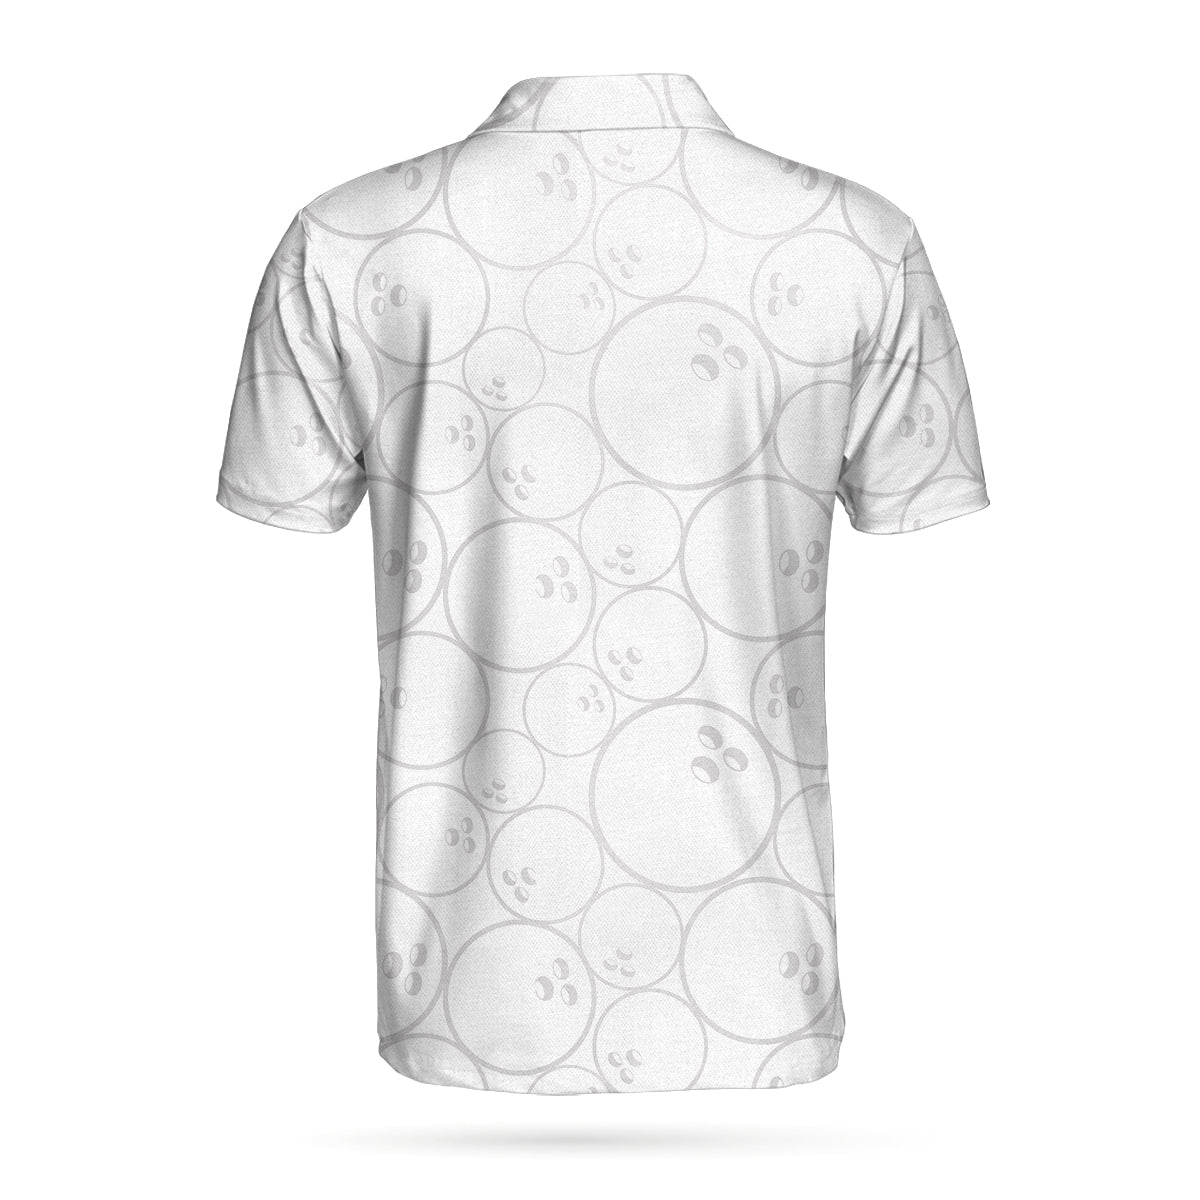 Bowling White And Golden Pattern Short Sleeve Polo Shirt/ Bowling Ball Pattern Polo Shirt/ Best Bowling Shirt For Men Coolspod